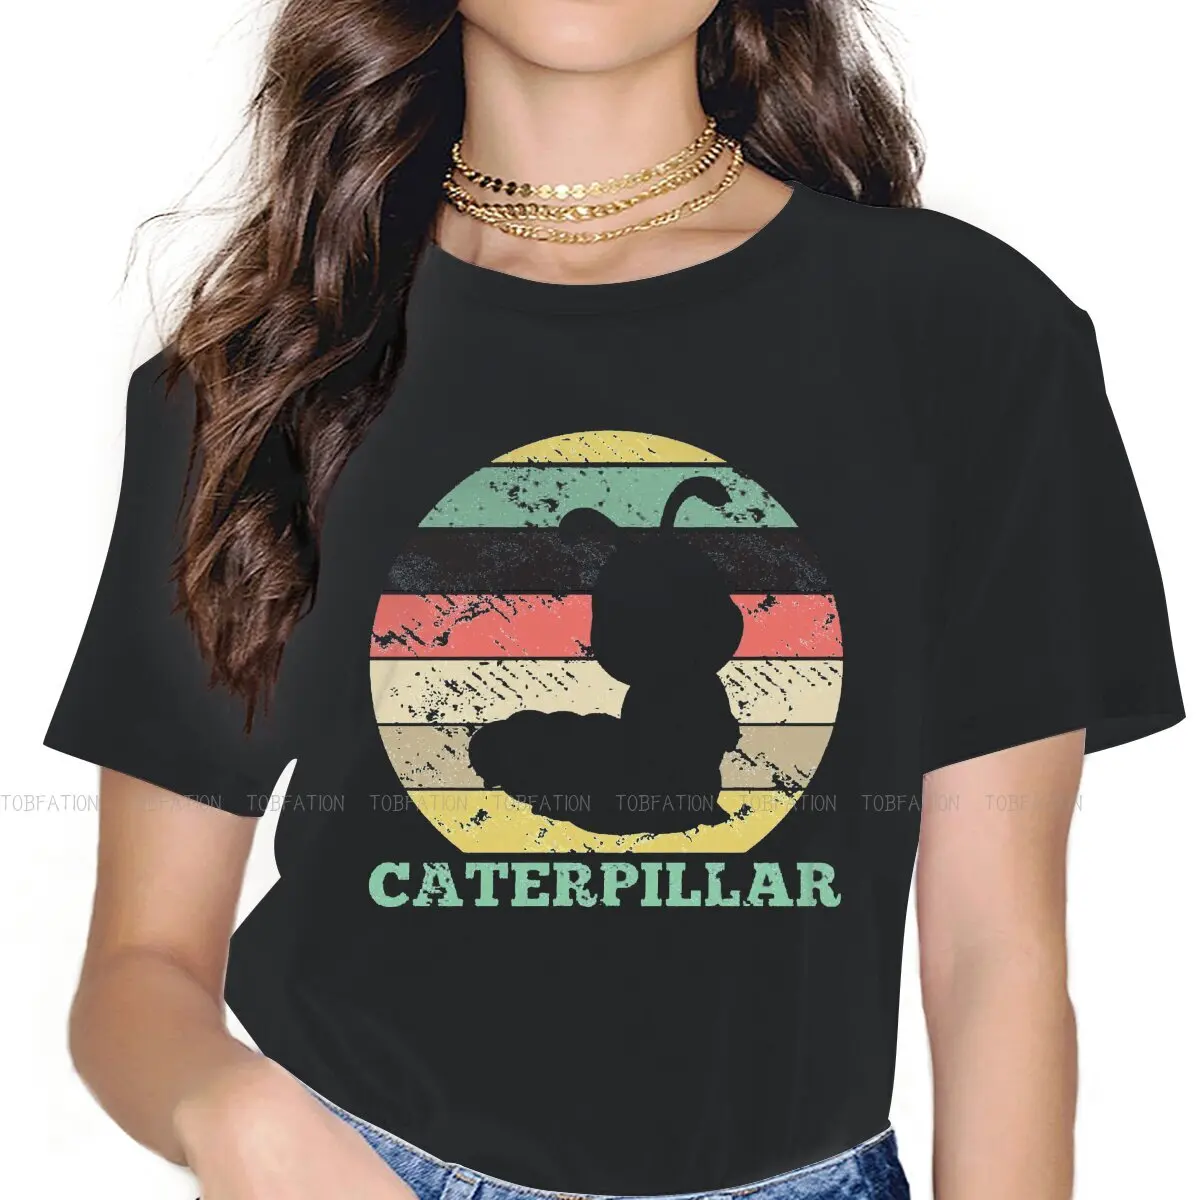 

Caterpillar Fashion TShirts Ace of Diamond laughter and Fun Woman Graphic 5XL T Shirt Round Neck